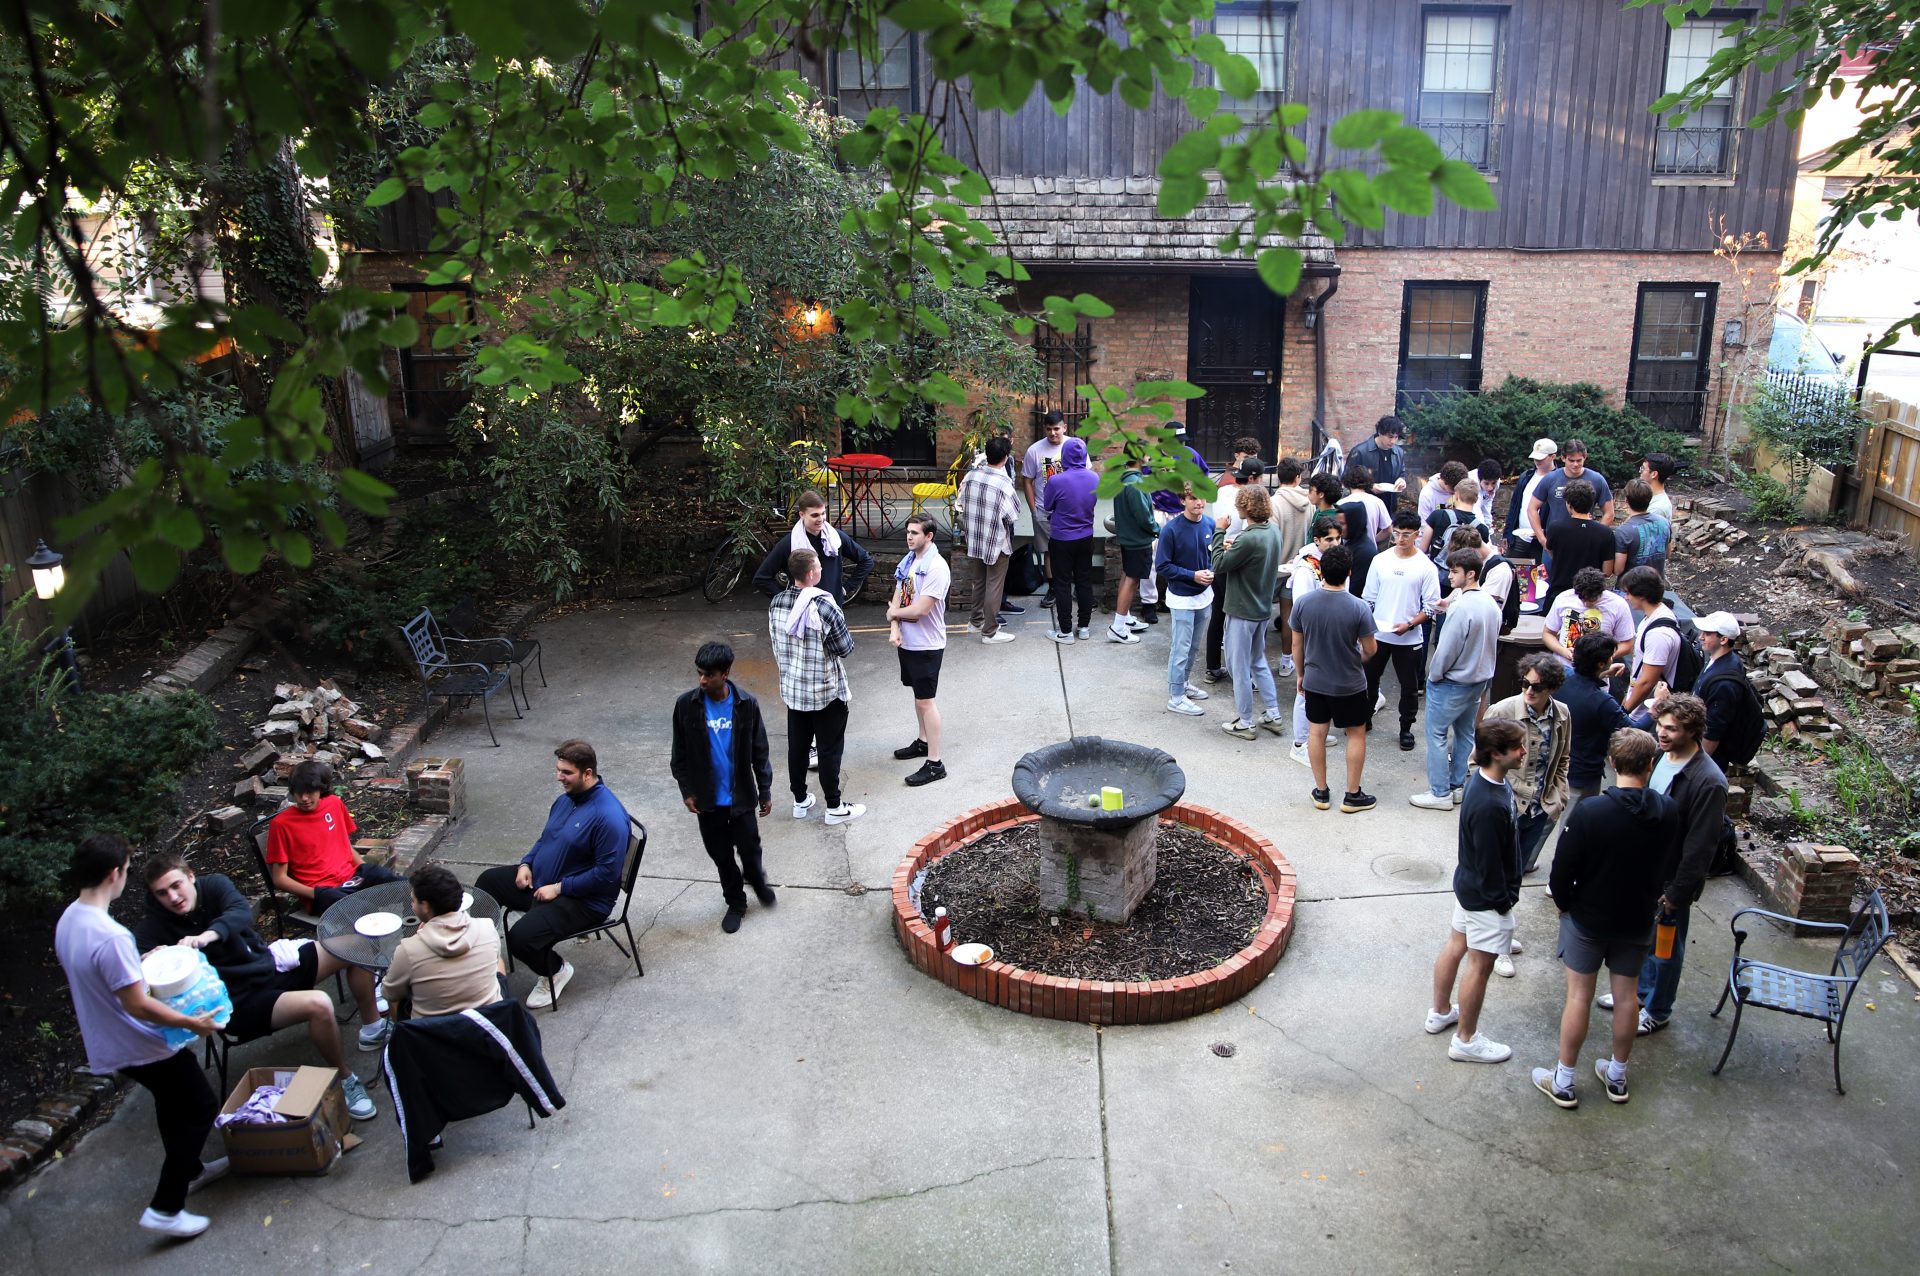 Sigma Alpha Epsilon (SAE) hosted a recruitment BBQ with the brothers event on Sept. 12.